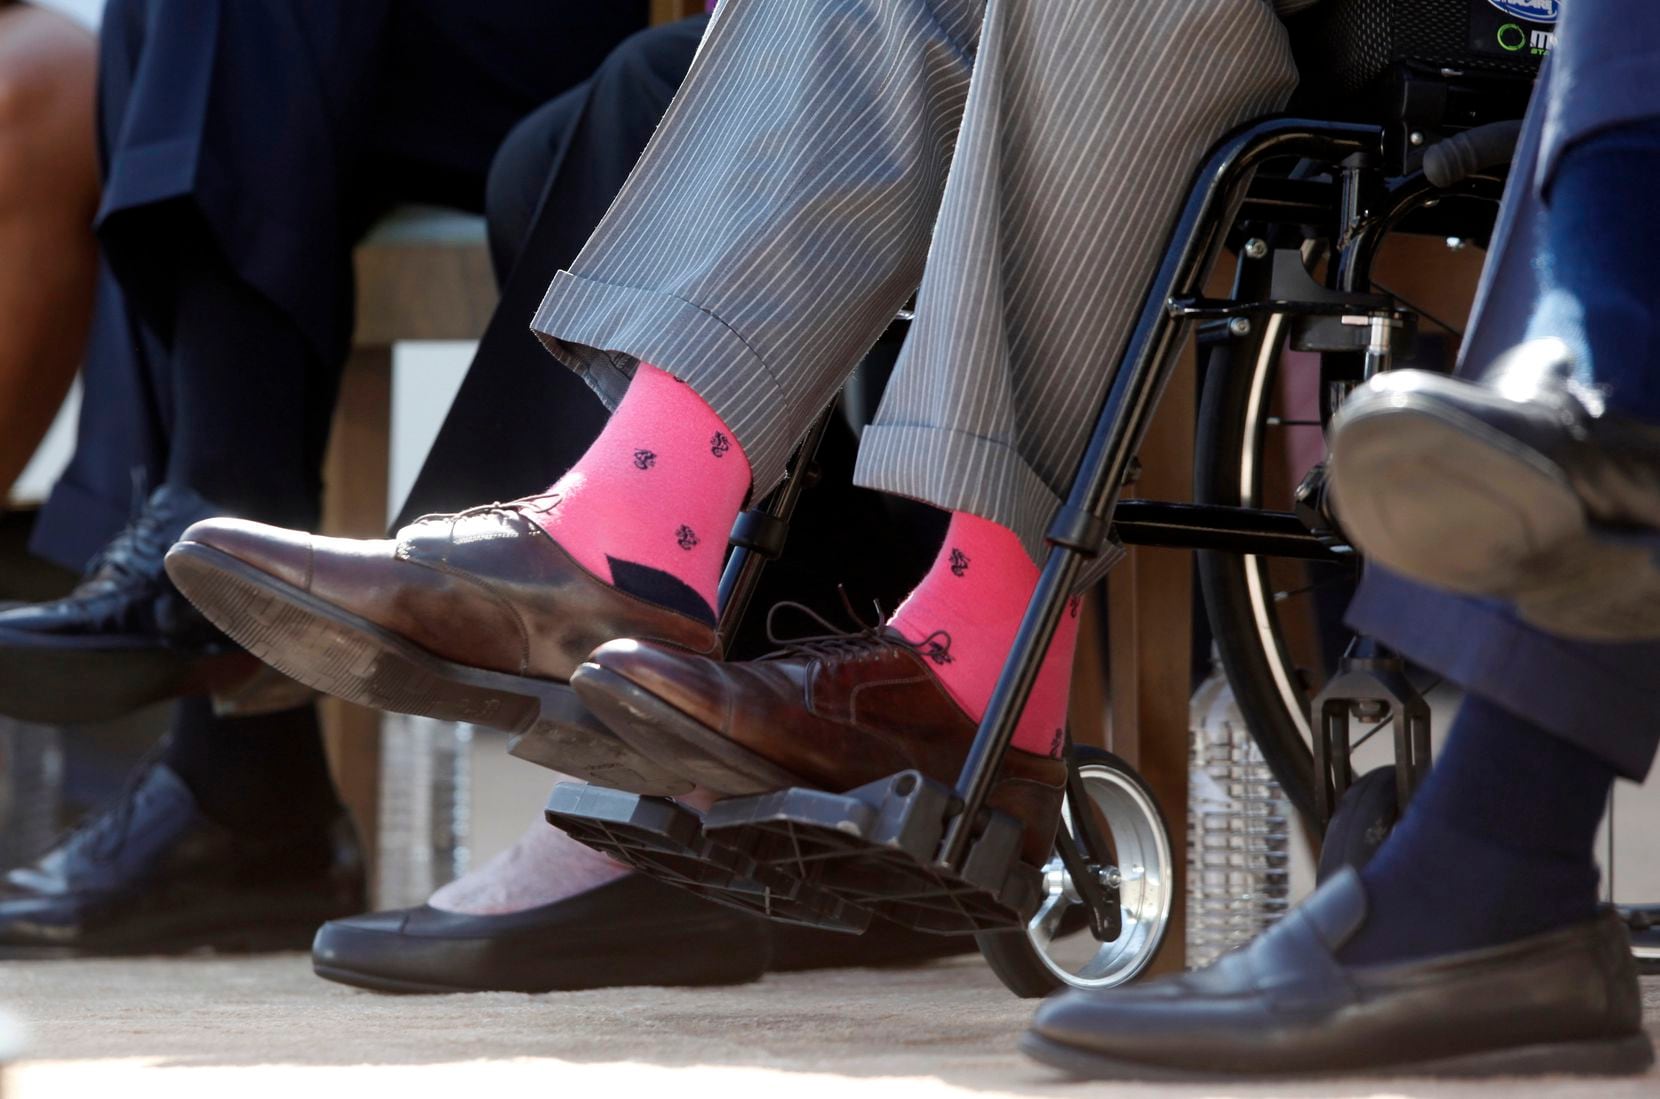 2013: Former President George H.W. Bush wears pink socks as he is seated in a wheelchair at...